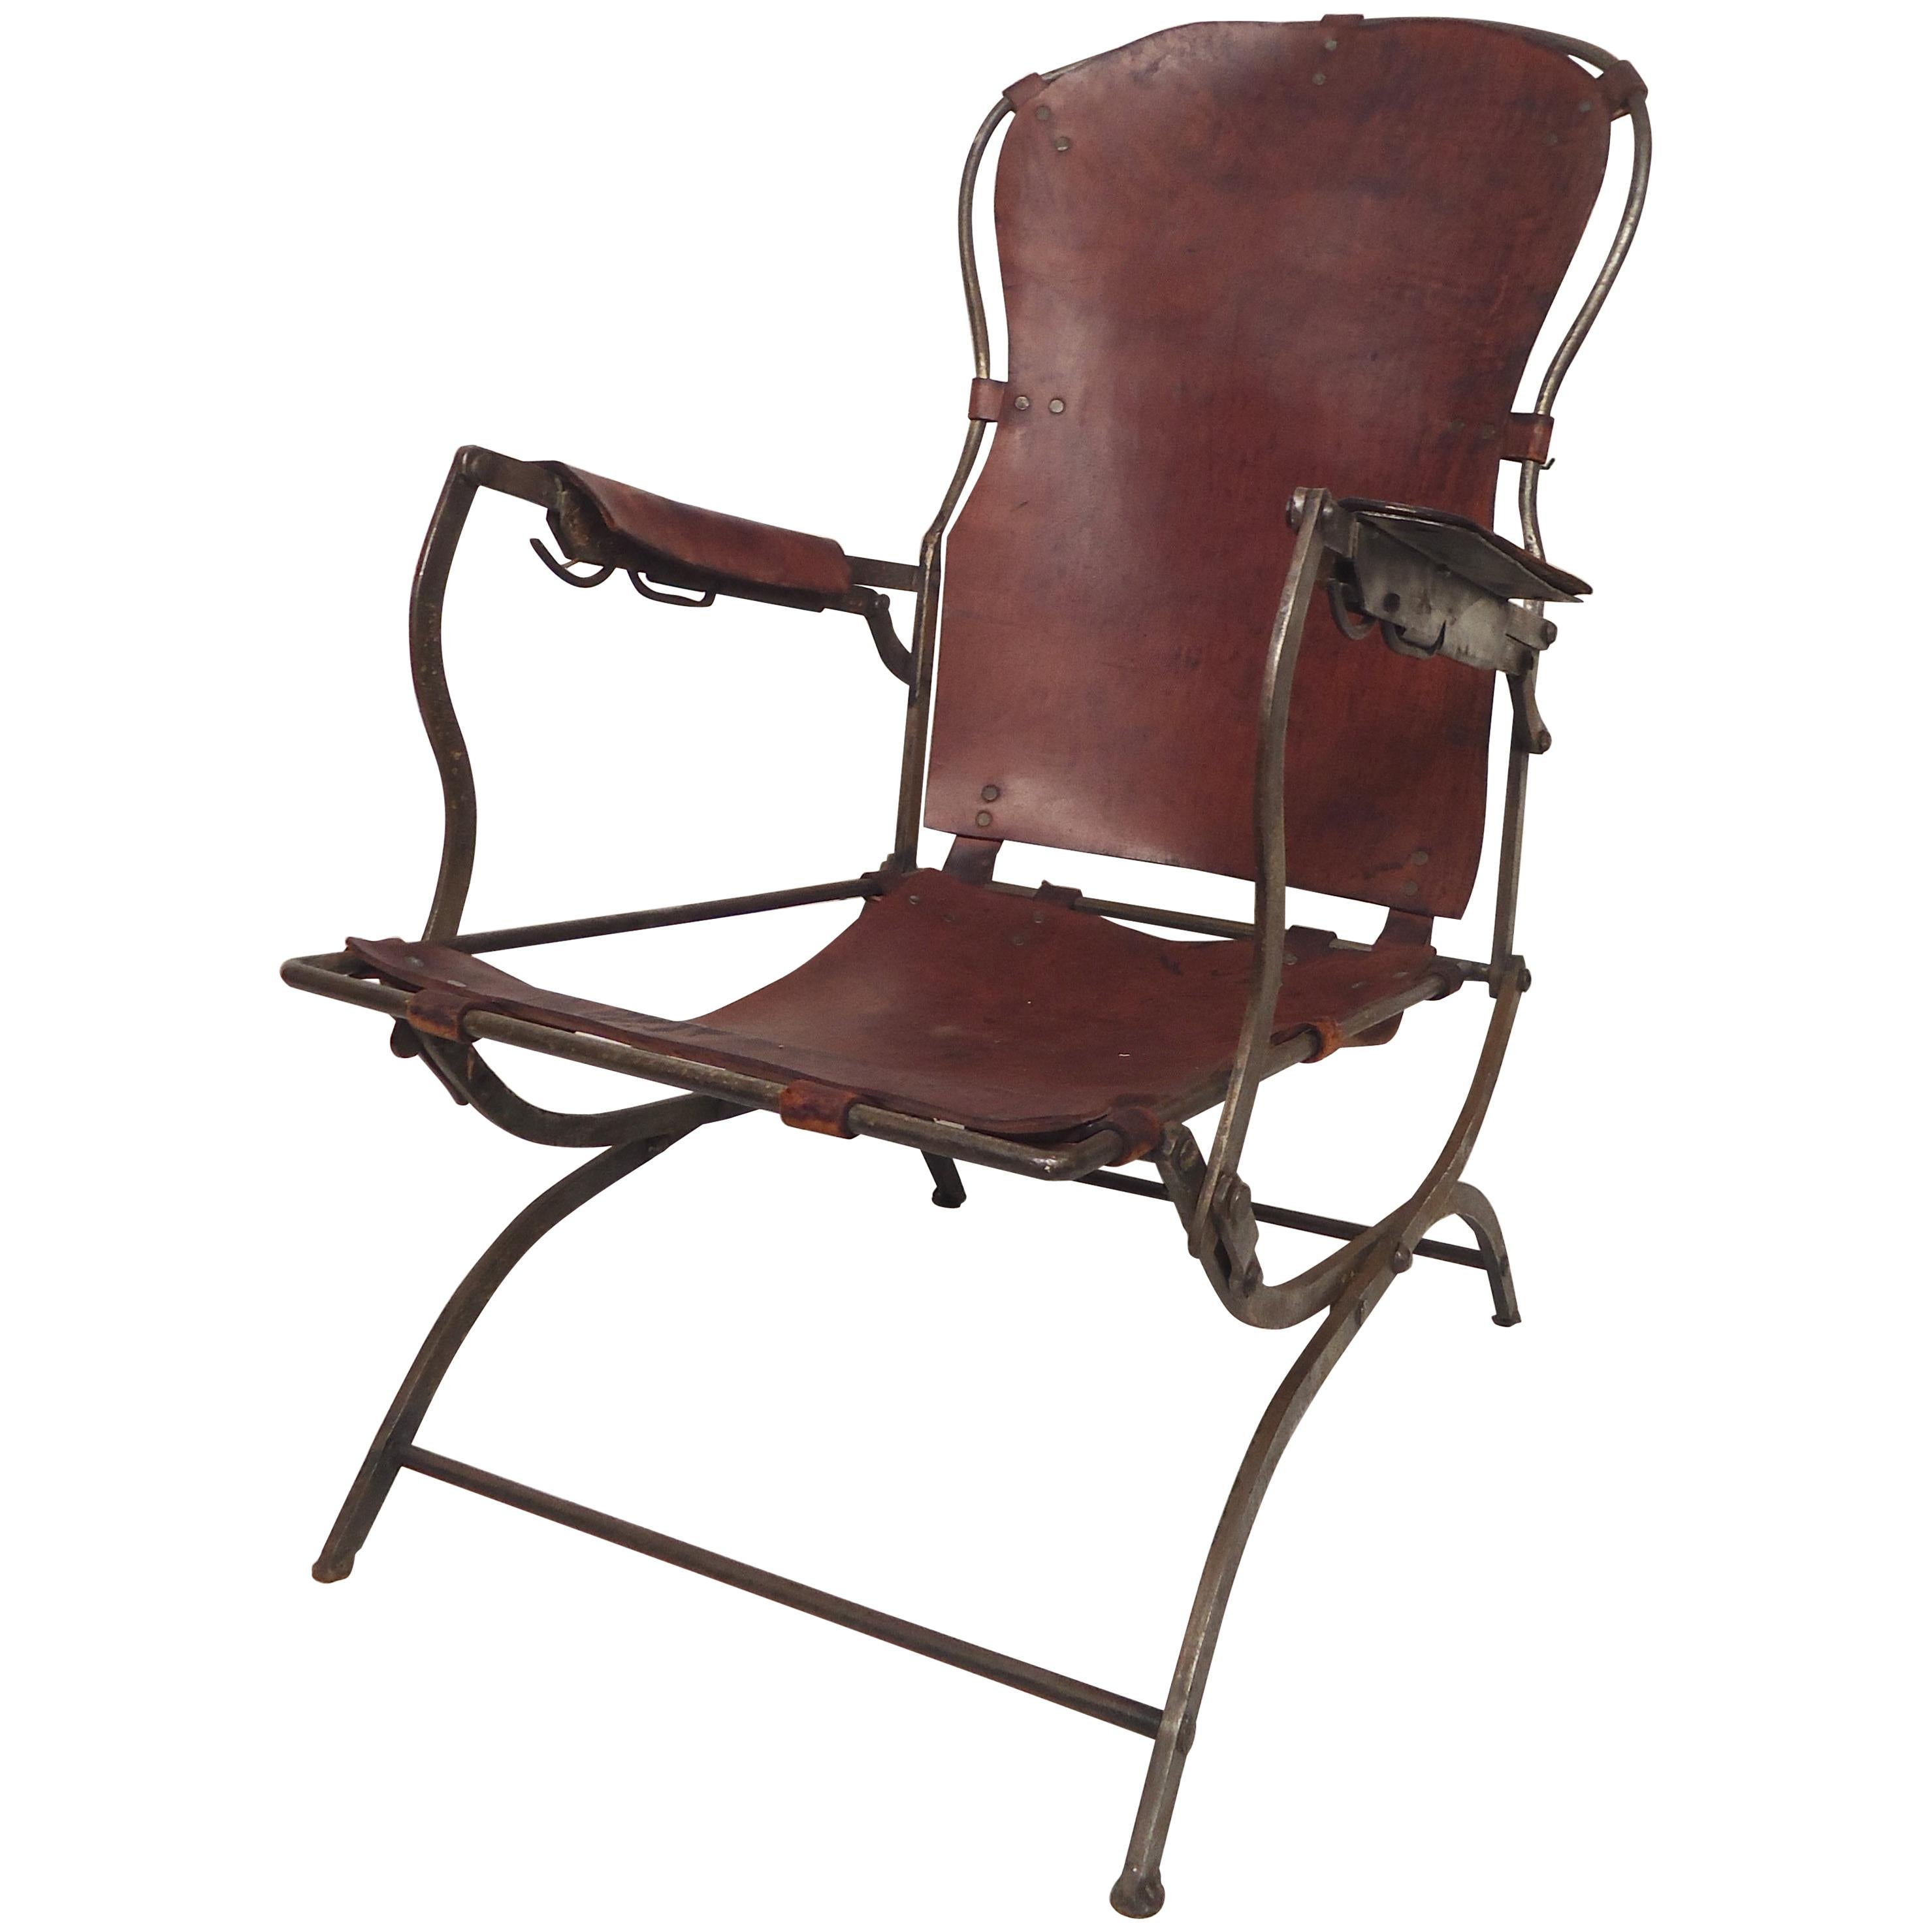 Metal and Leather Lounge Chair